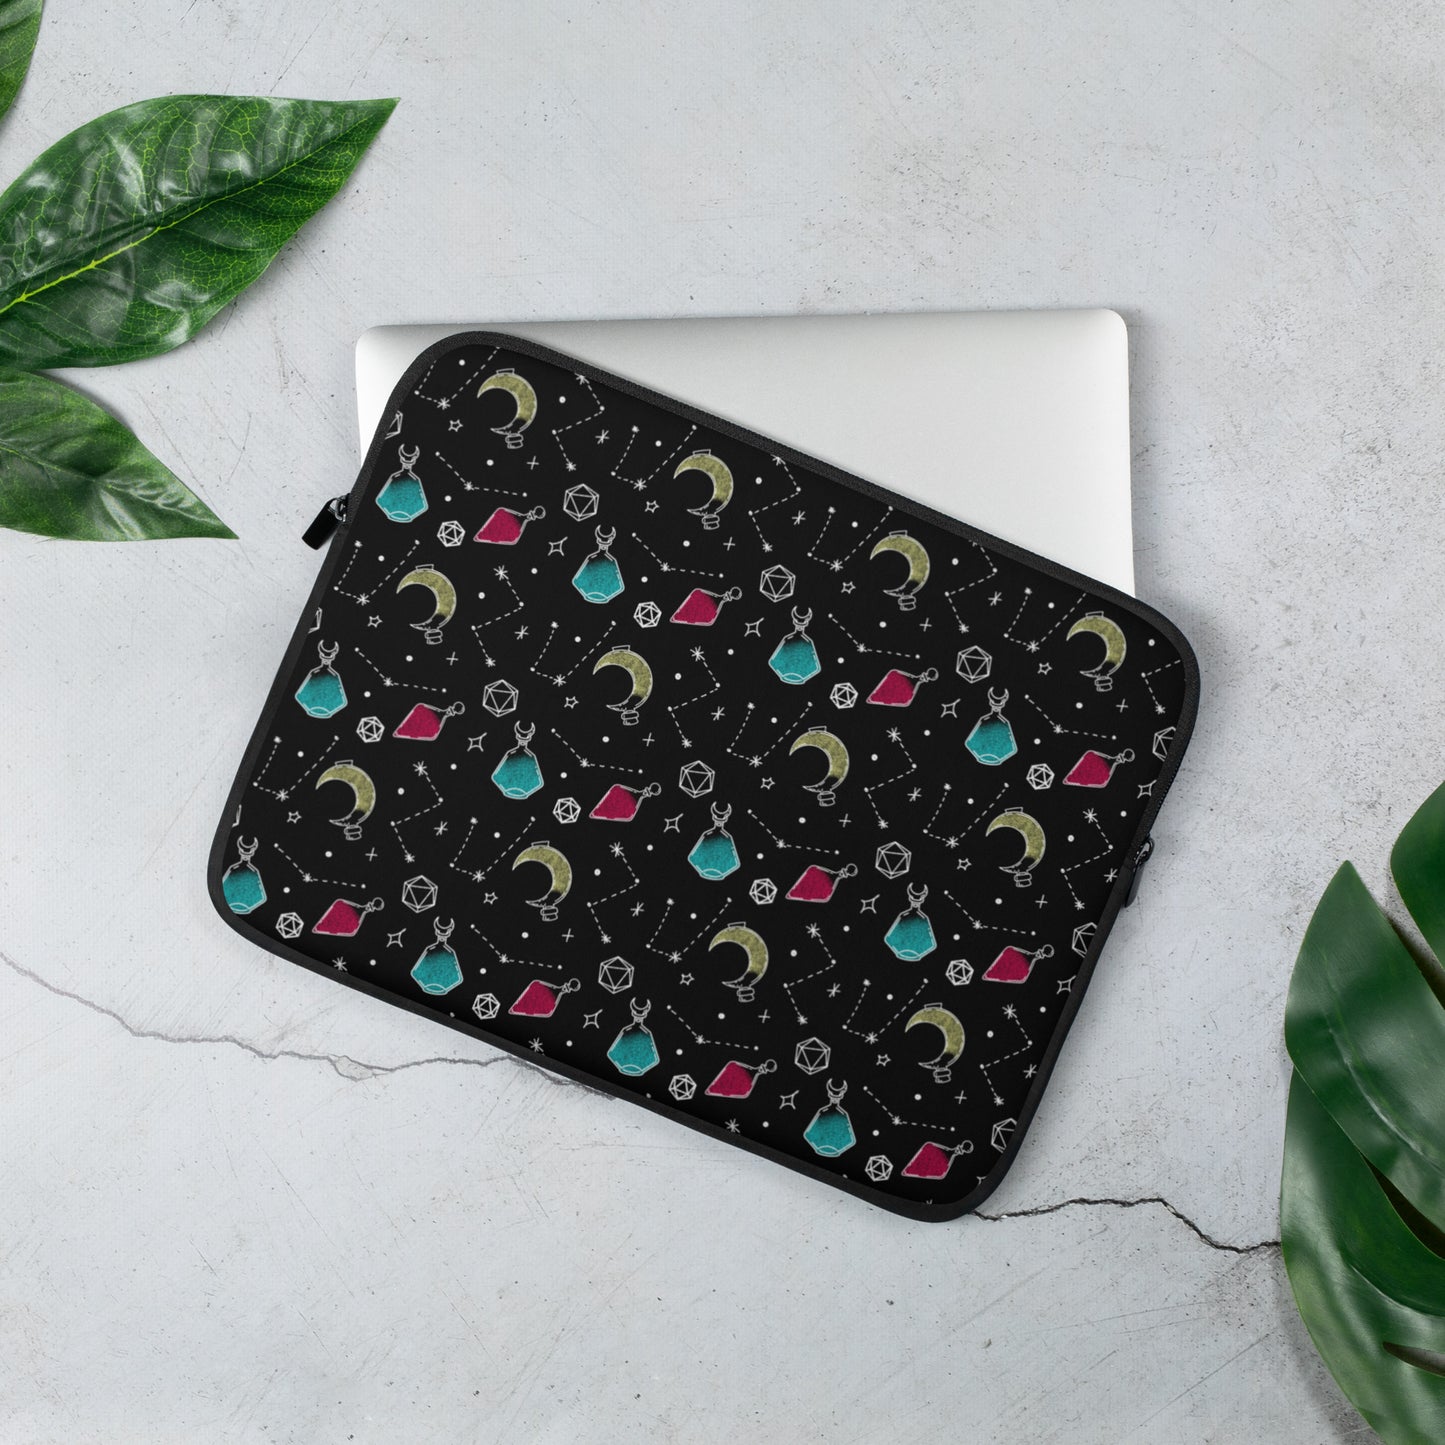 Potions and Dice Laptop Sleeve